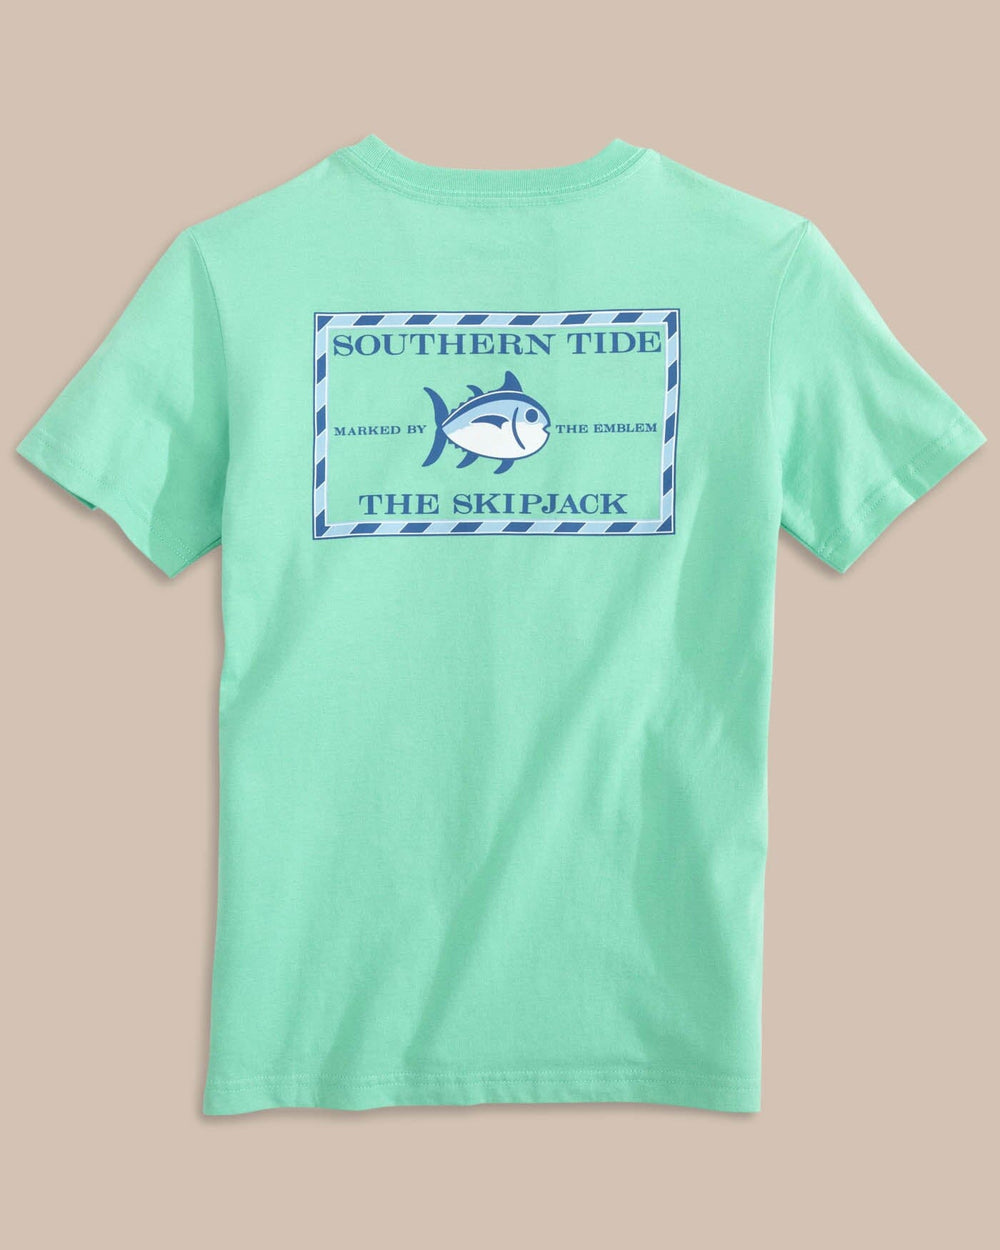 The back view of the Kids Original Skipjack T-shirt by Southern Tide - Isle of Pines